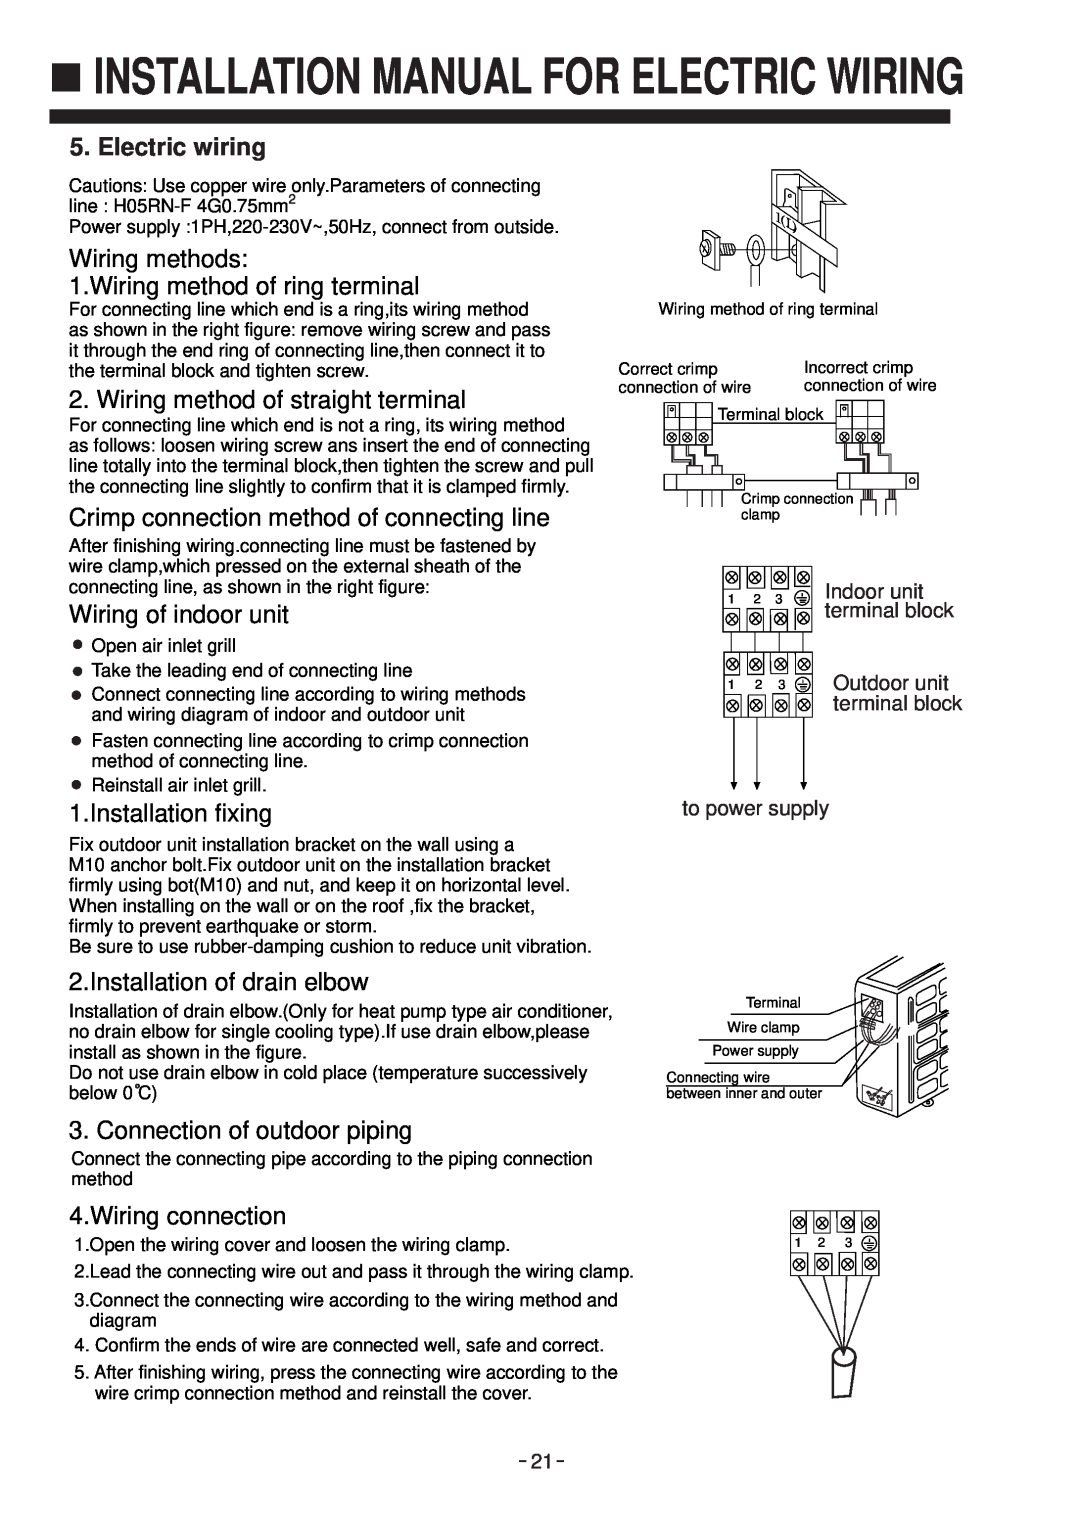 Haier No. 0010572410 Installation Manual For Electric Wiring, Electric wiring, Indoor unit terminal block, to power supply 